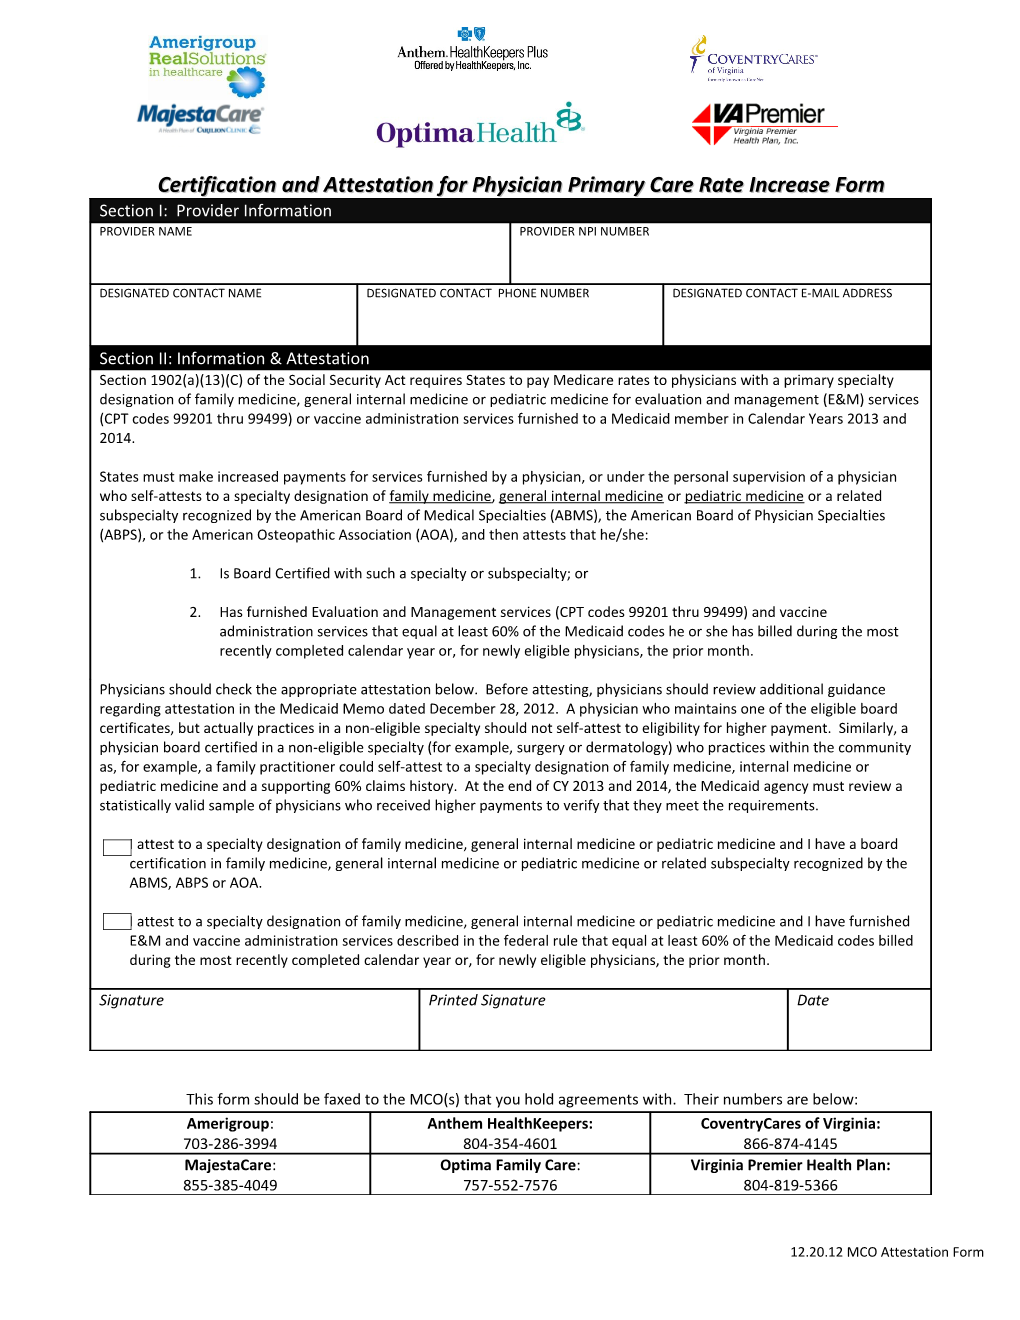 Certification and Attestation for Physicianprimary Care Rate Increase Form